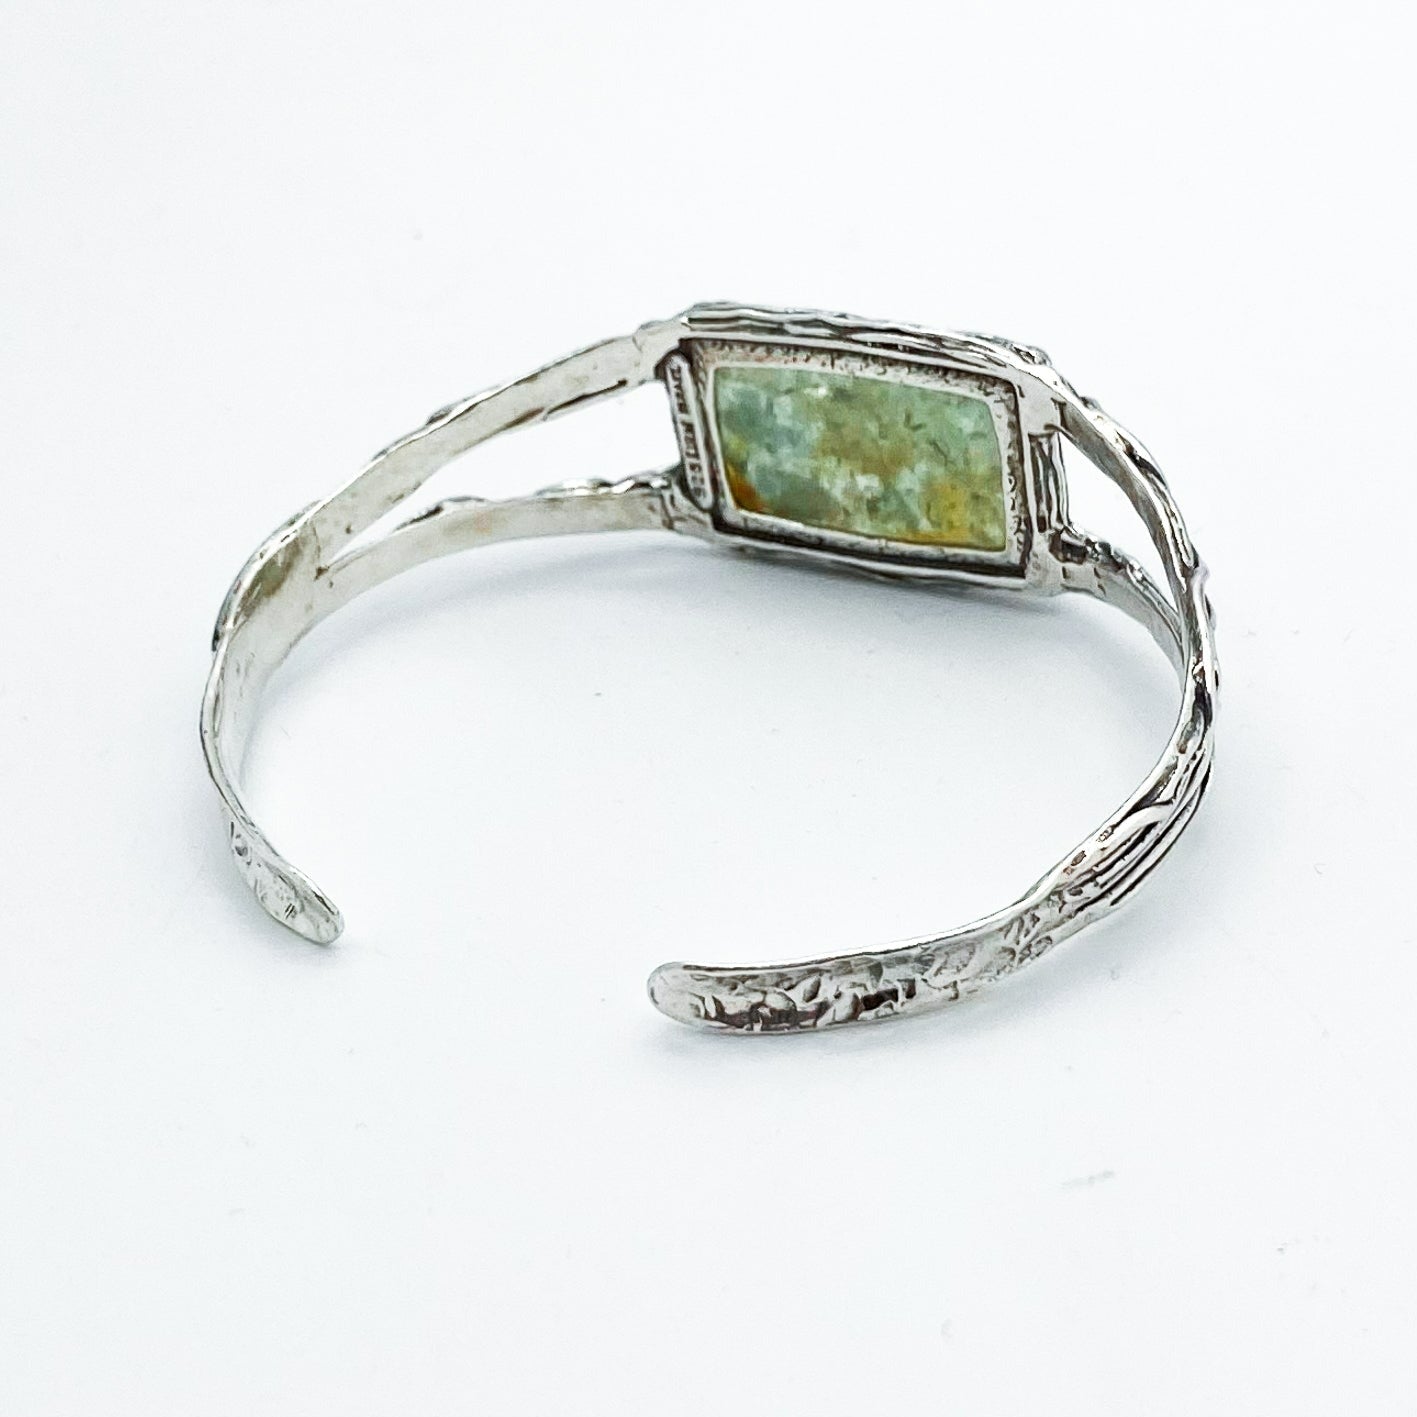 Back View of Rectangular Roman Glass on double-band 925 Sterling Silver cuff with vined detailing